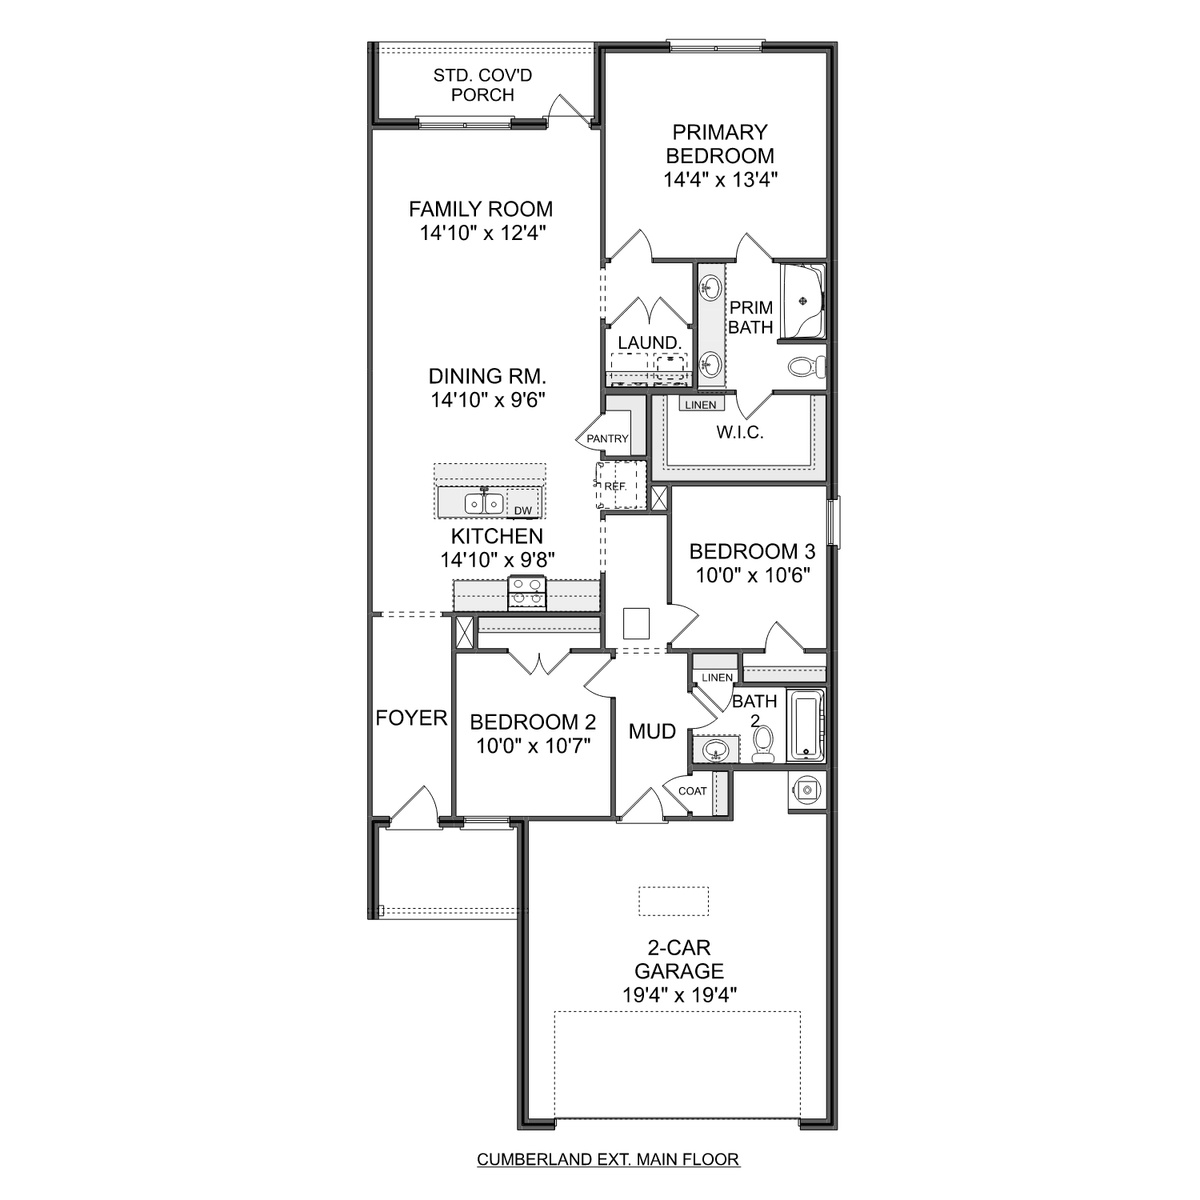 1 - The Cumberland B floor plan layout for 3151 Lea Lane in Davidson Homes' Hollon Meadow community.